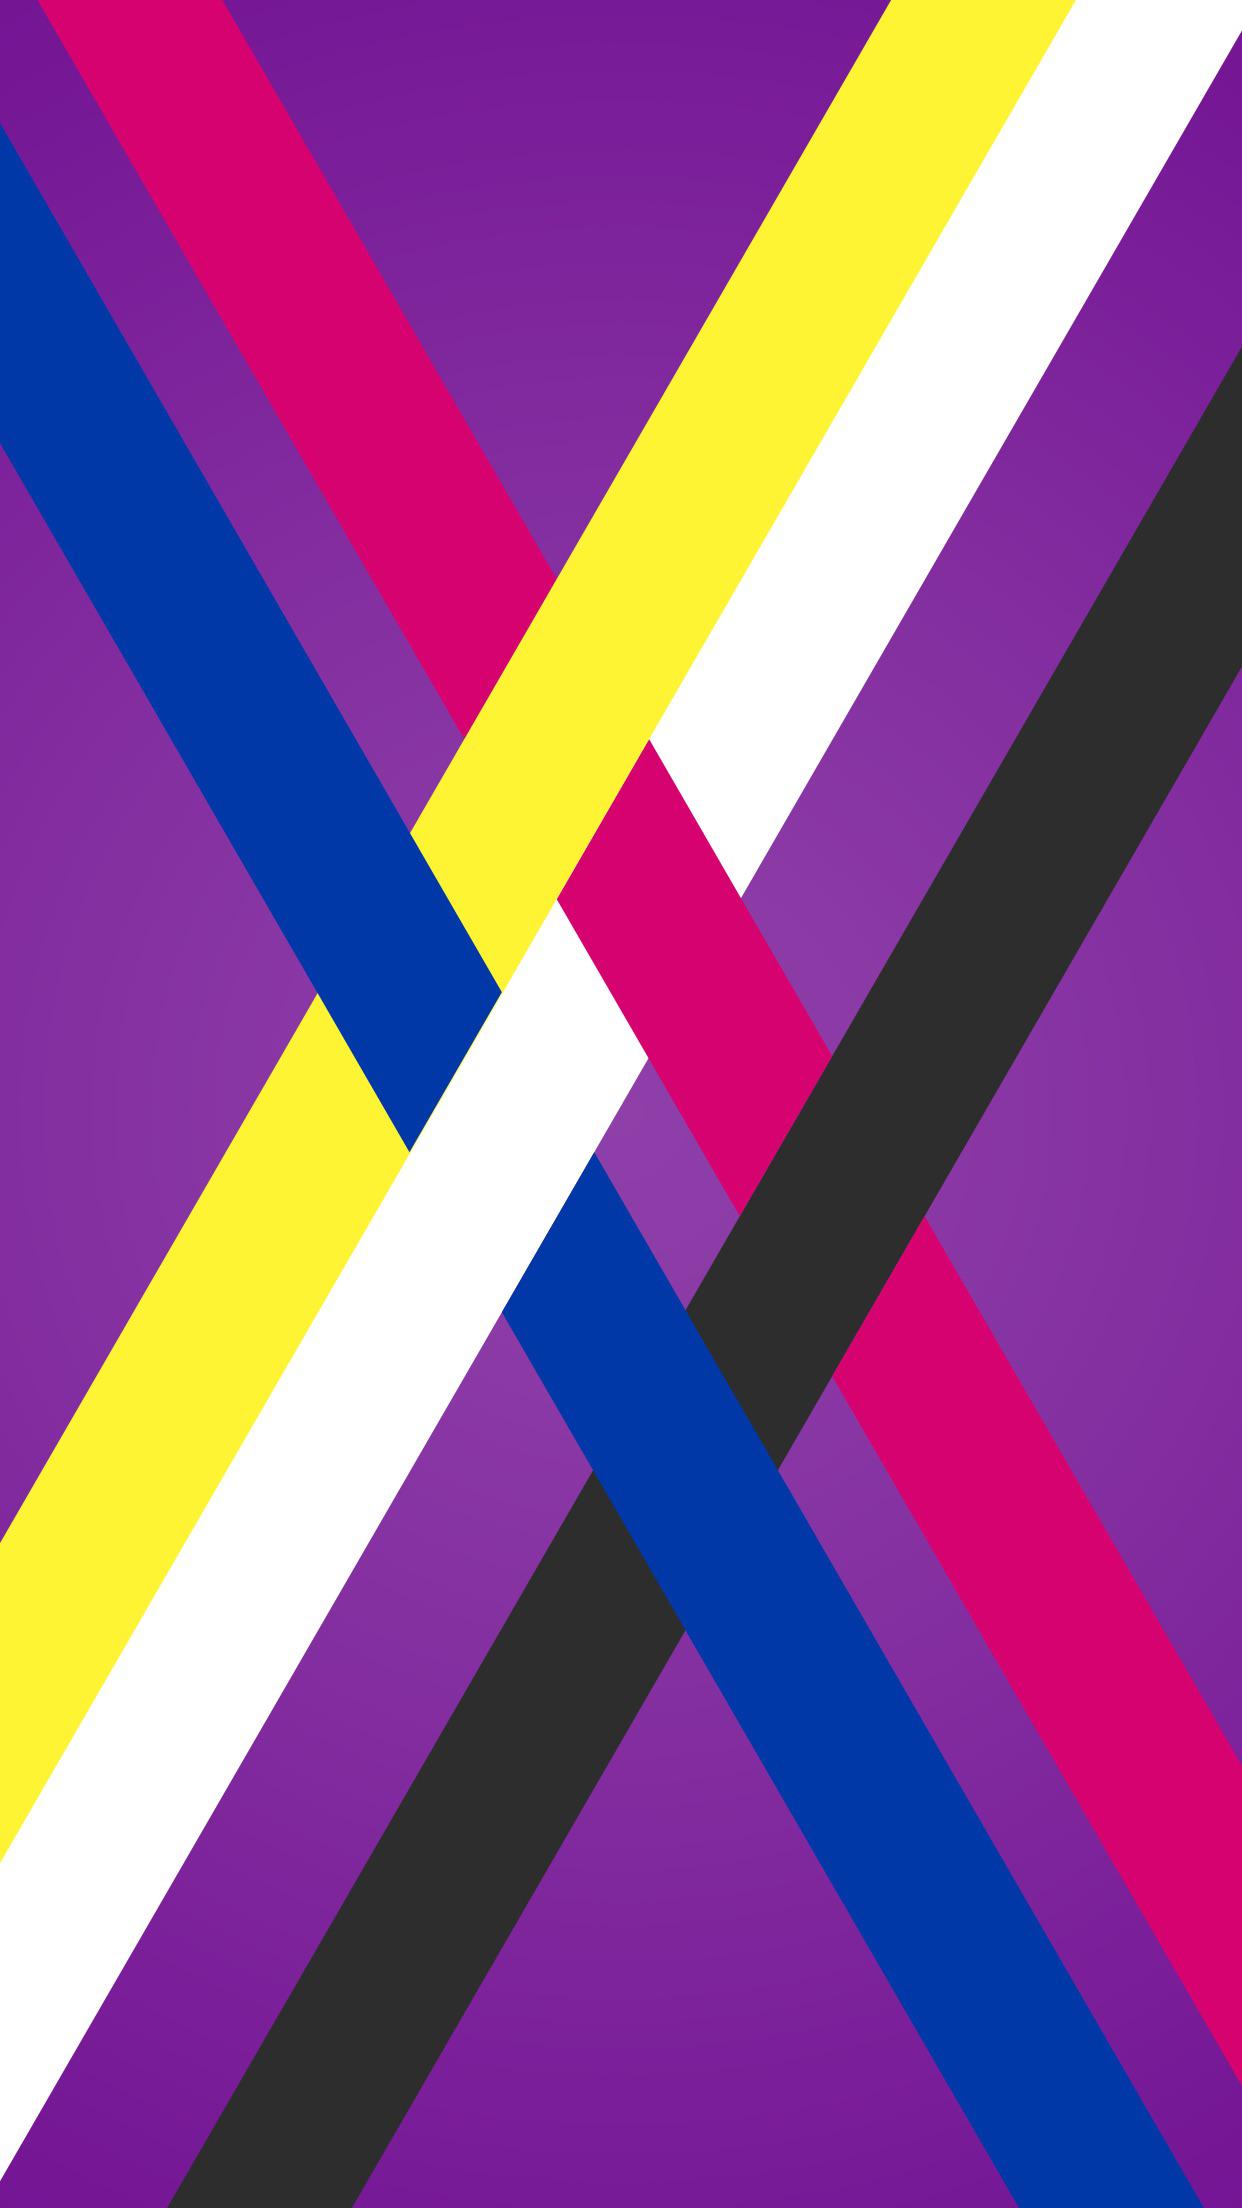 I Made A Bi Non Binary Wallpaper For My Phone And Wanted To Share With You Guys. Hope You Like It!